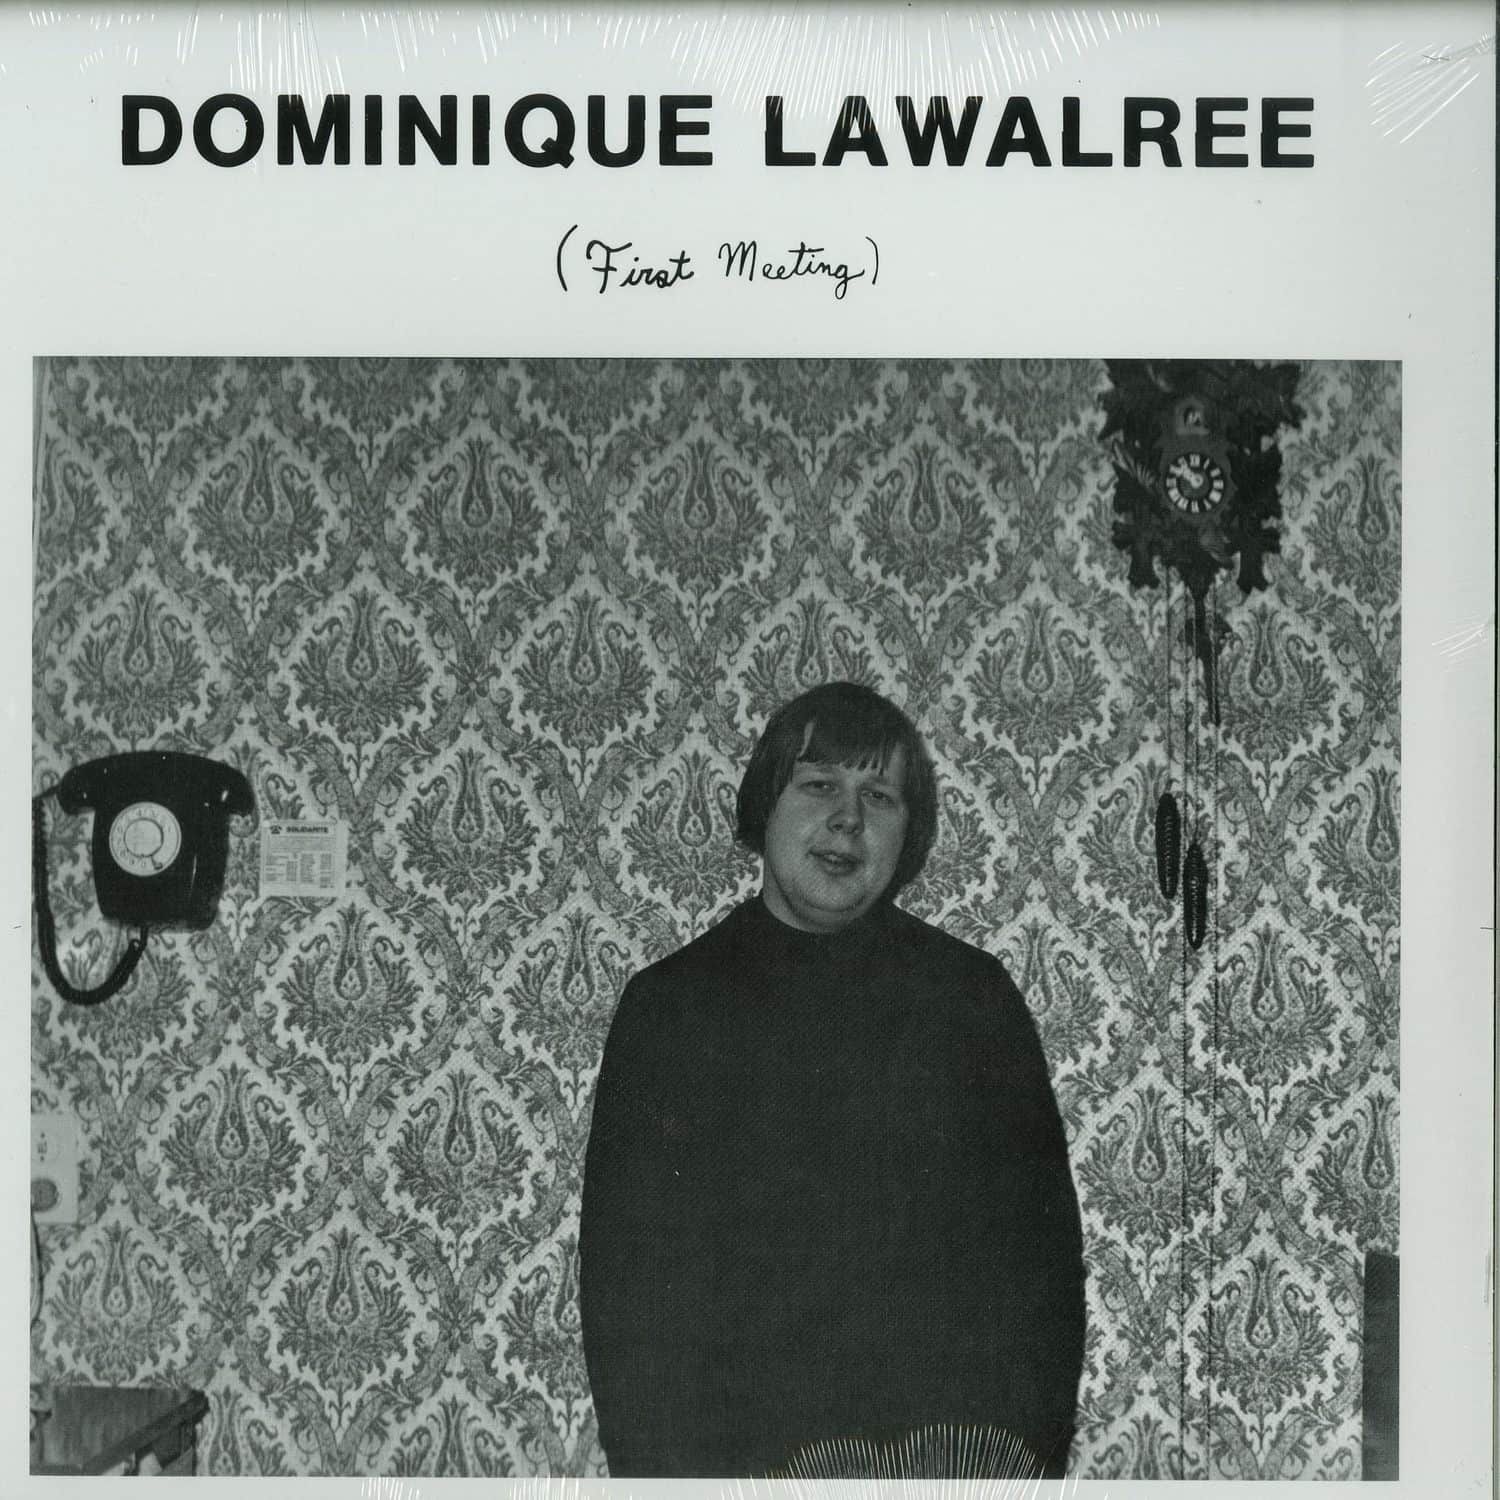 Dominique Lawalree - FIRST MEETING